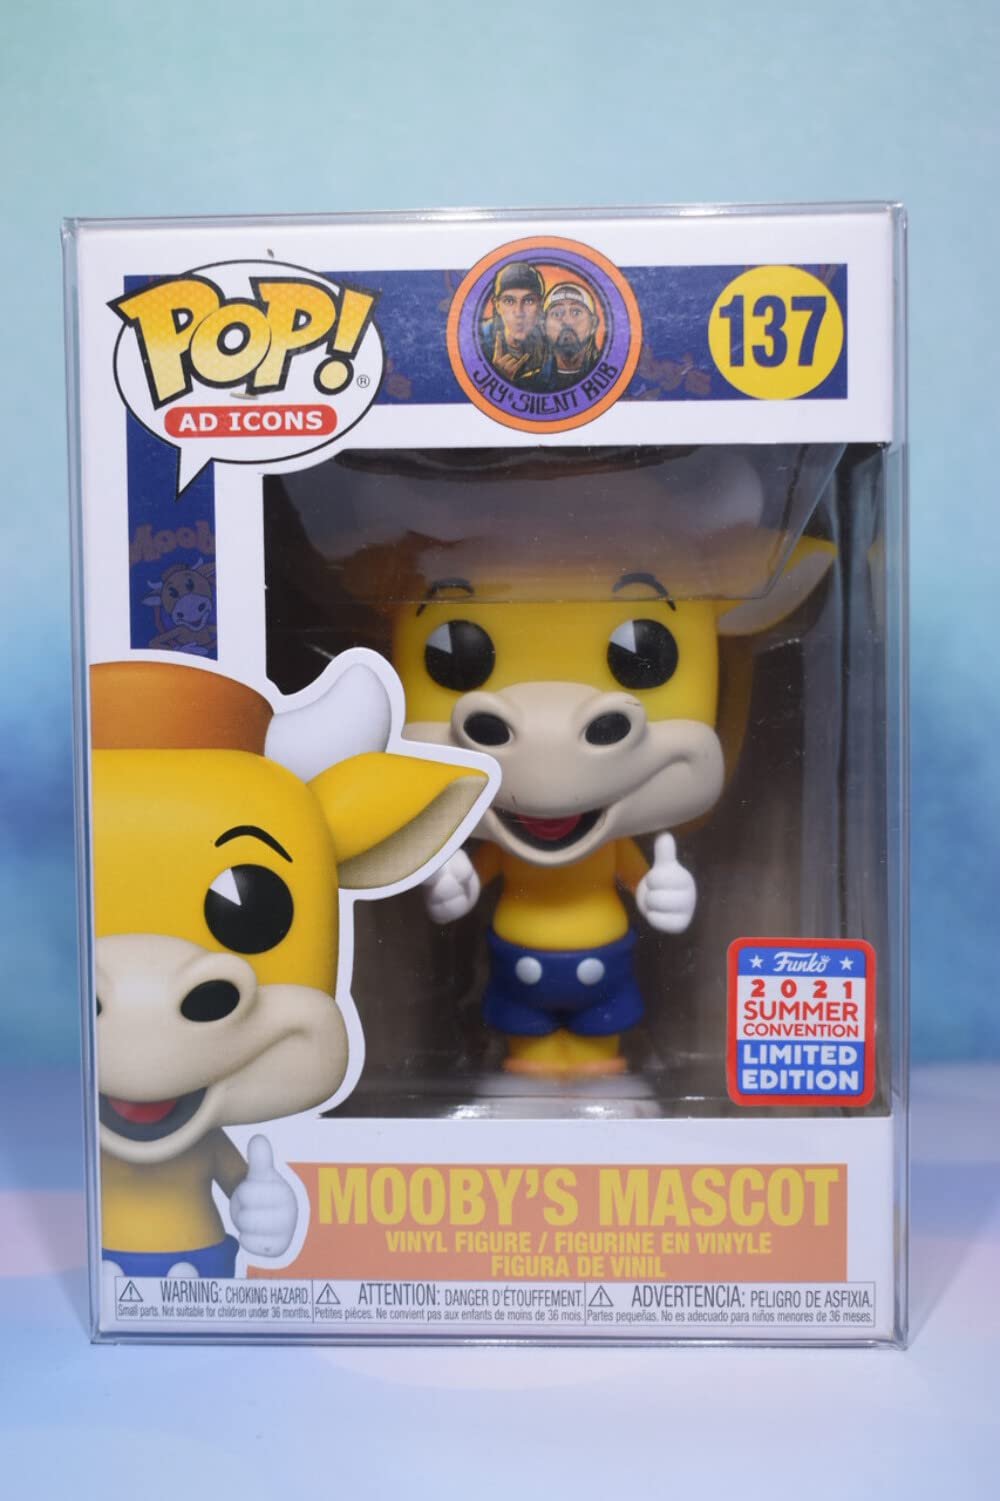 Funko POP! Ad Icons Jay and Silent Bob Mooby's Mascot #137 Exclusive